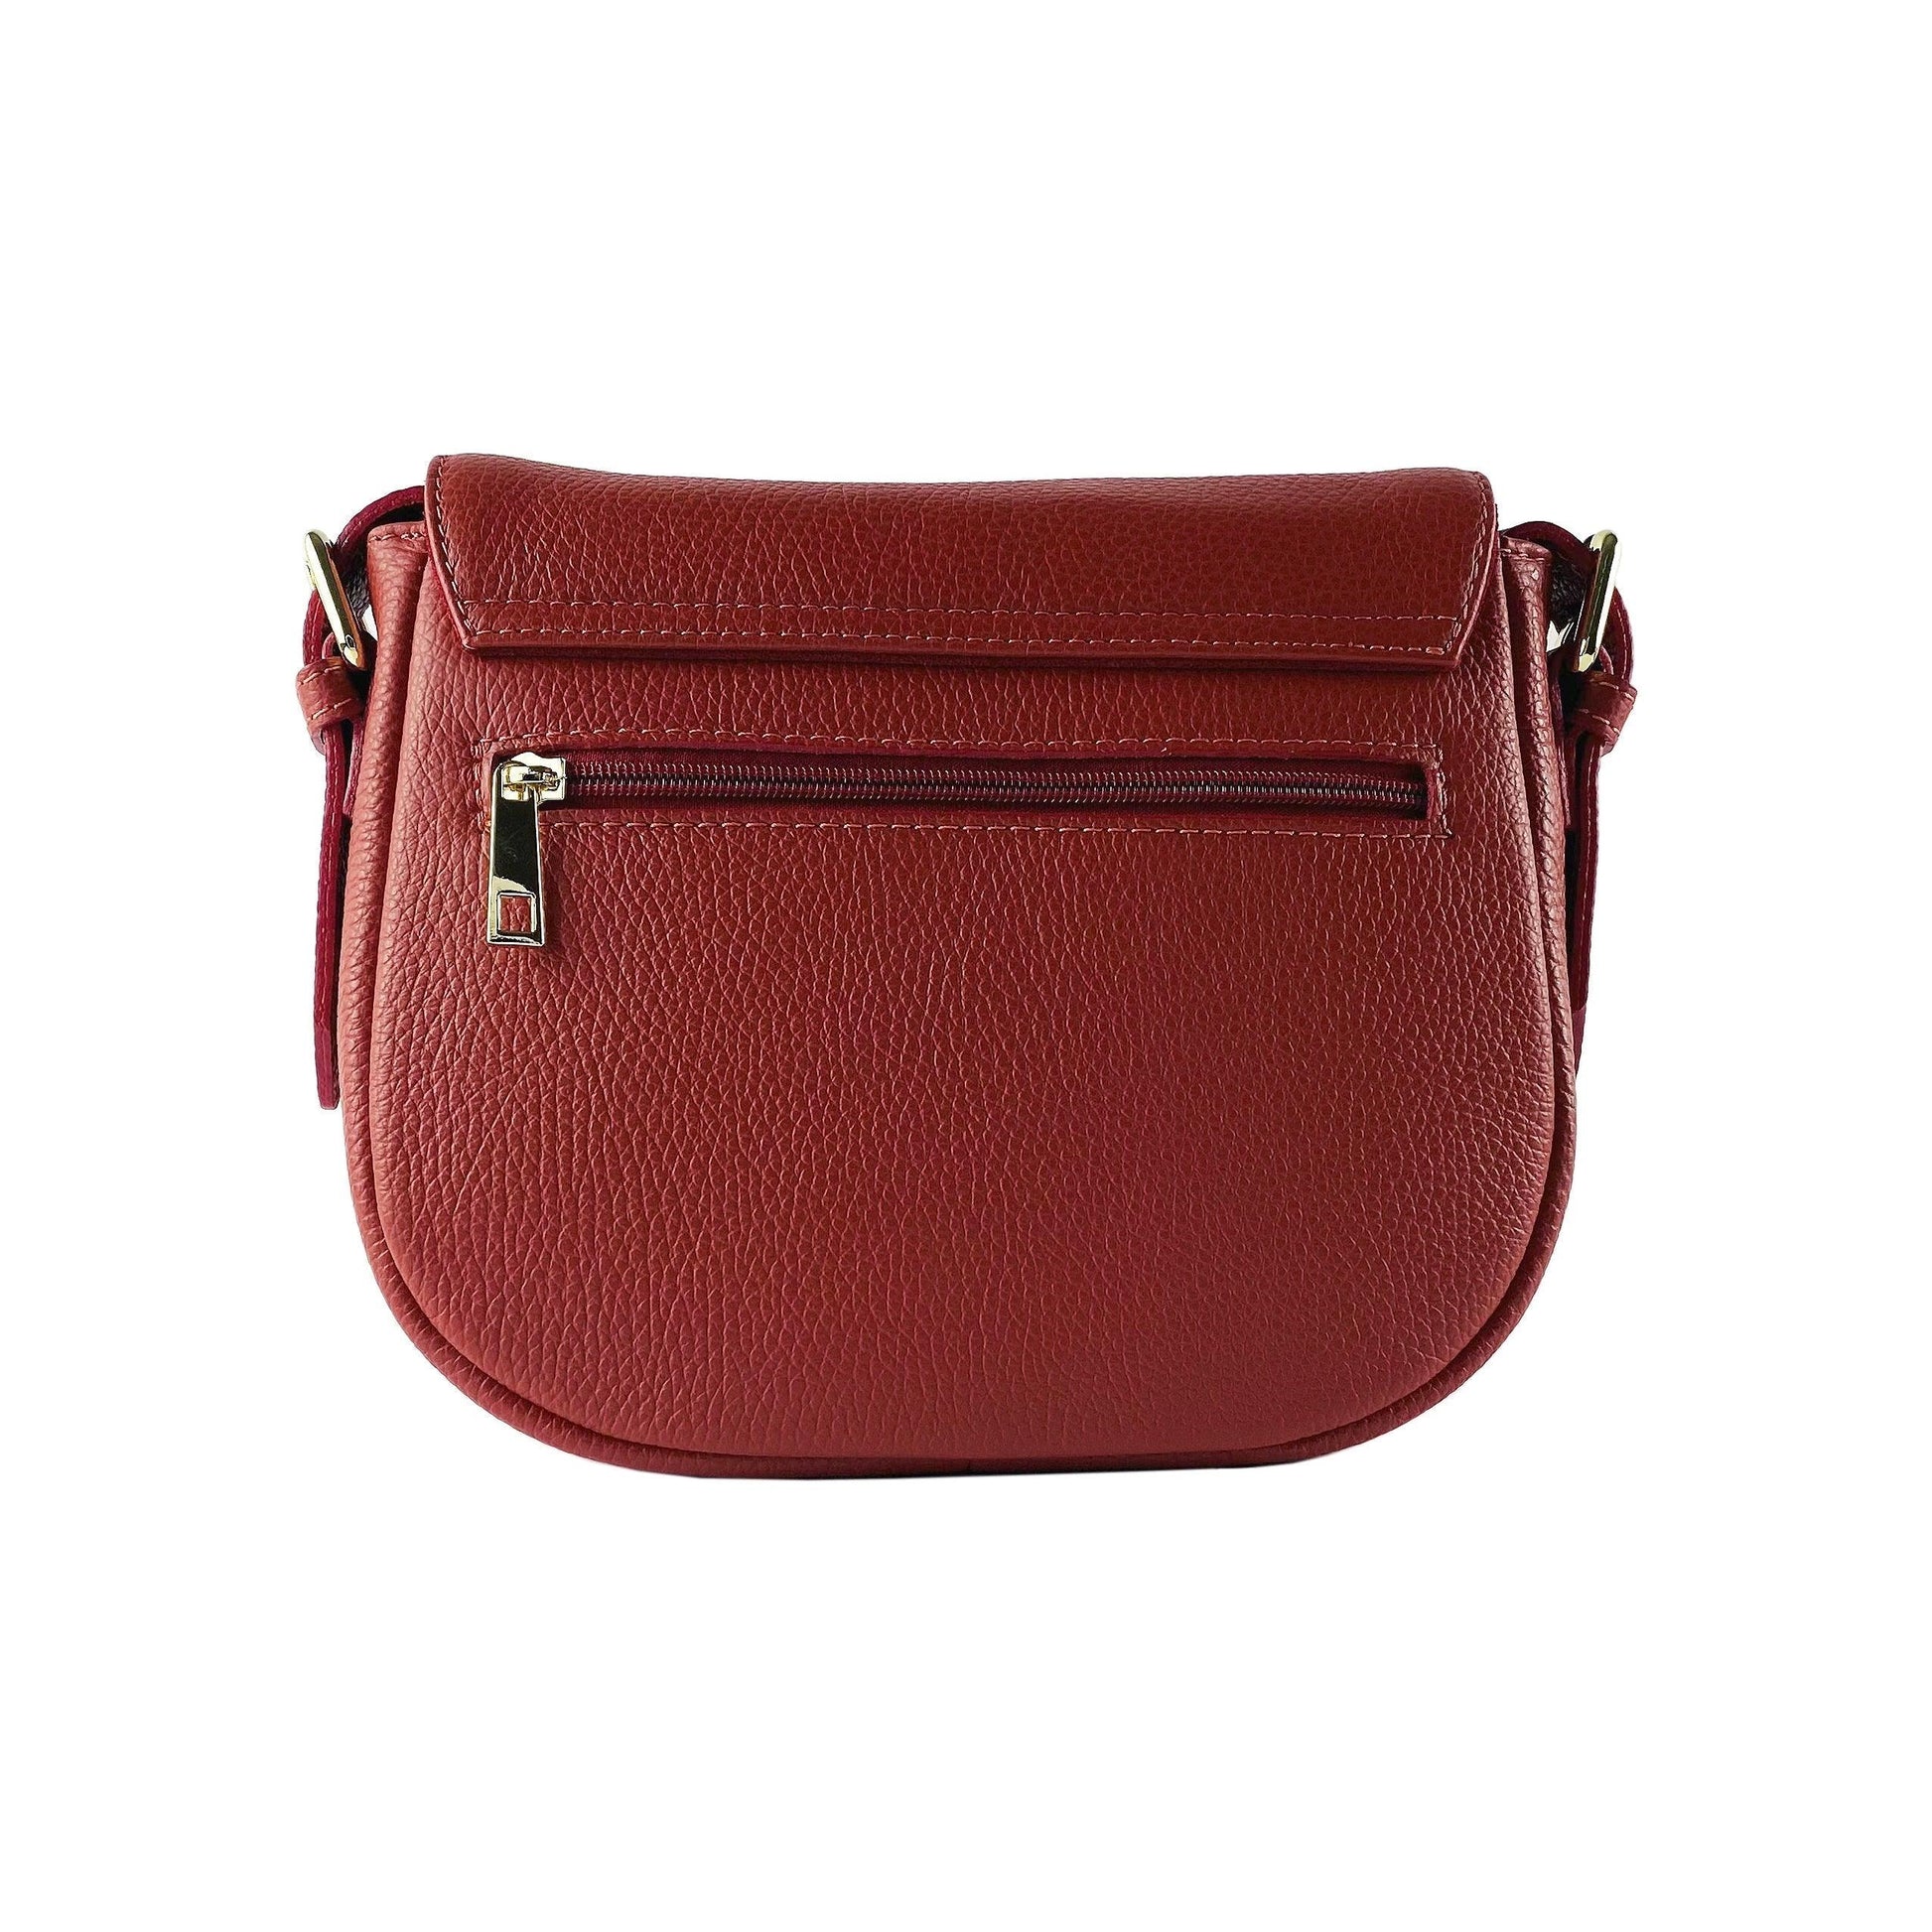 RB1002V | Woman bag in genuine leather with shoulder strap | 26 x 20 x 10 cm-1